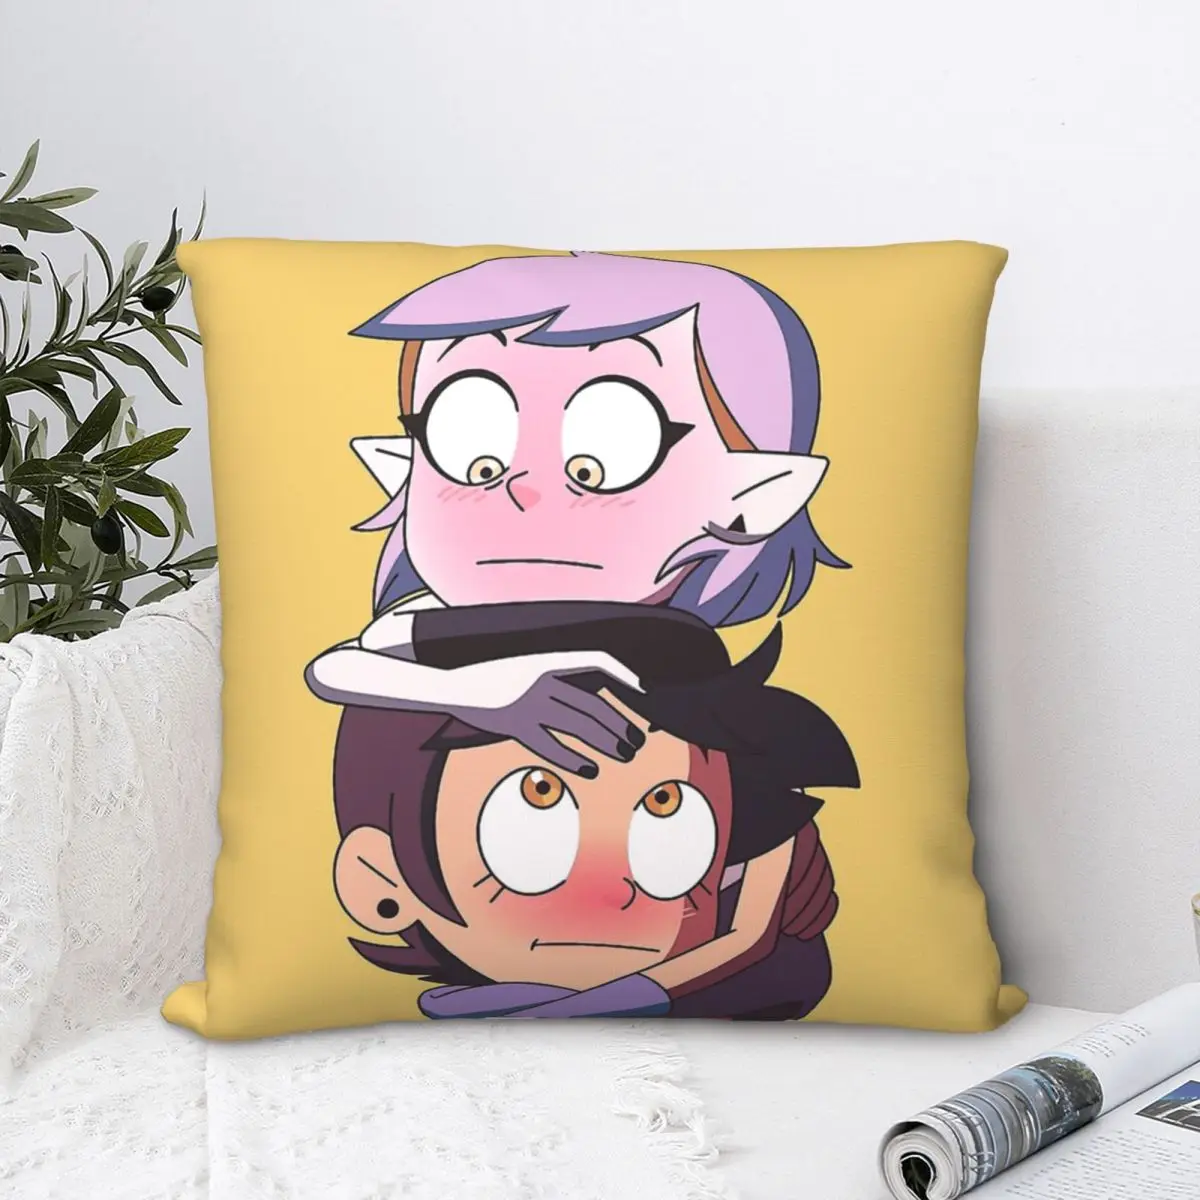 

Friends Hug Pillowcase The Owl House Anime Backpack Cushion Home DIY Printed Chair Coussin Covers Decorative